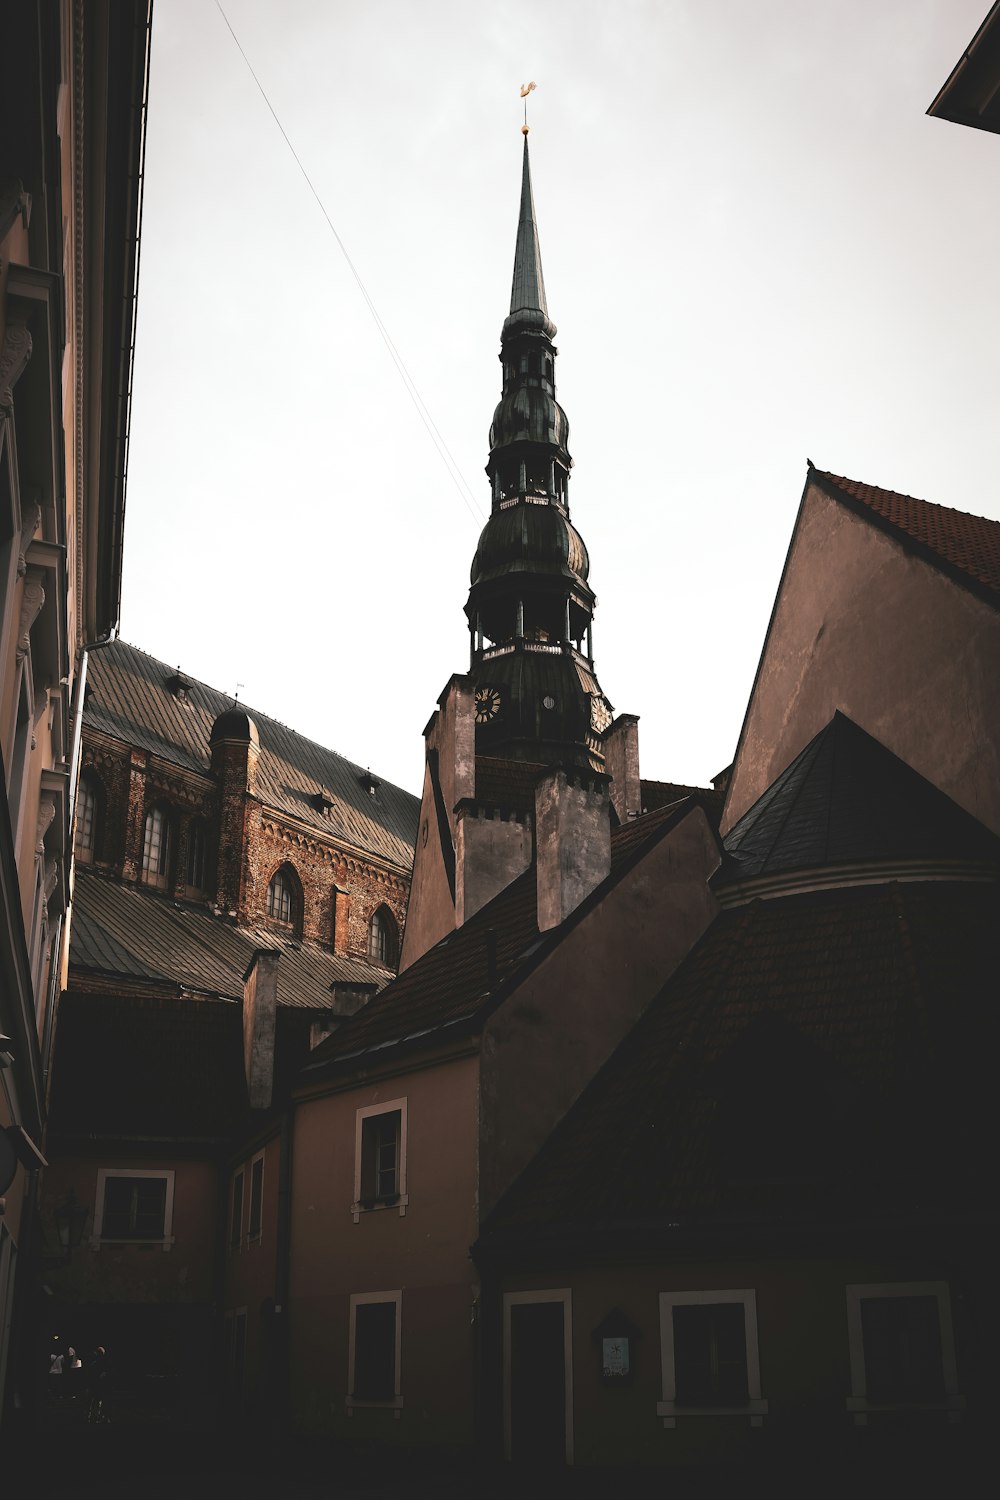 a steeple of a building with a clock on it